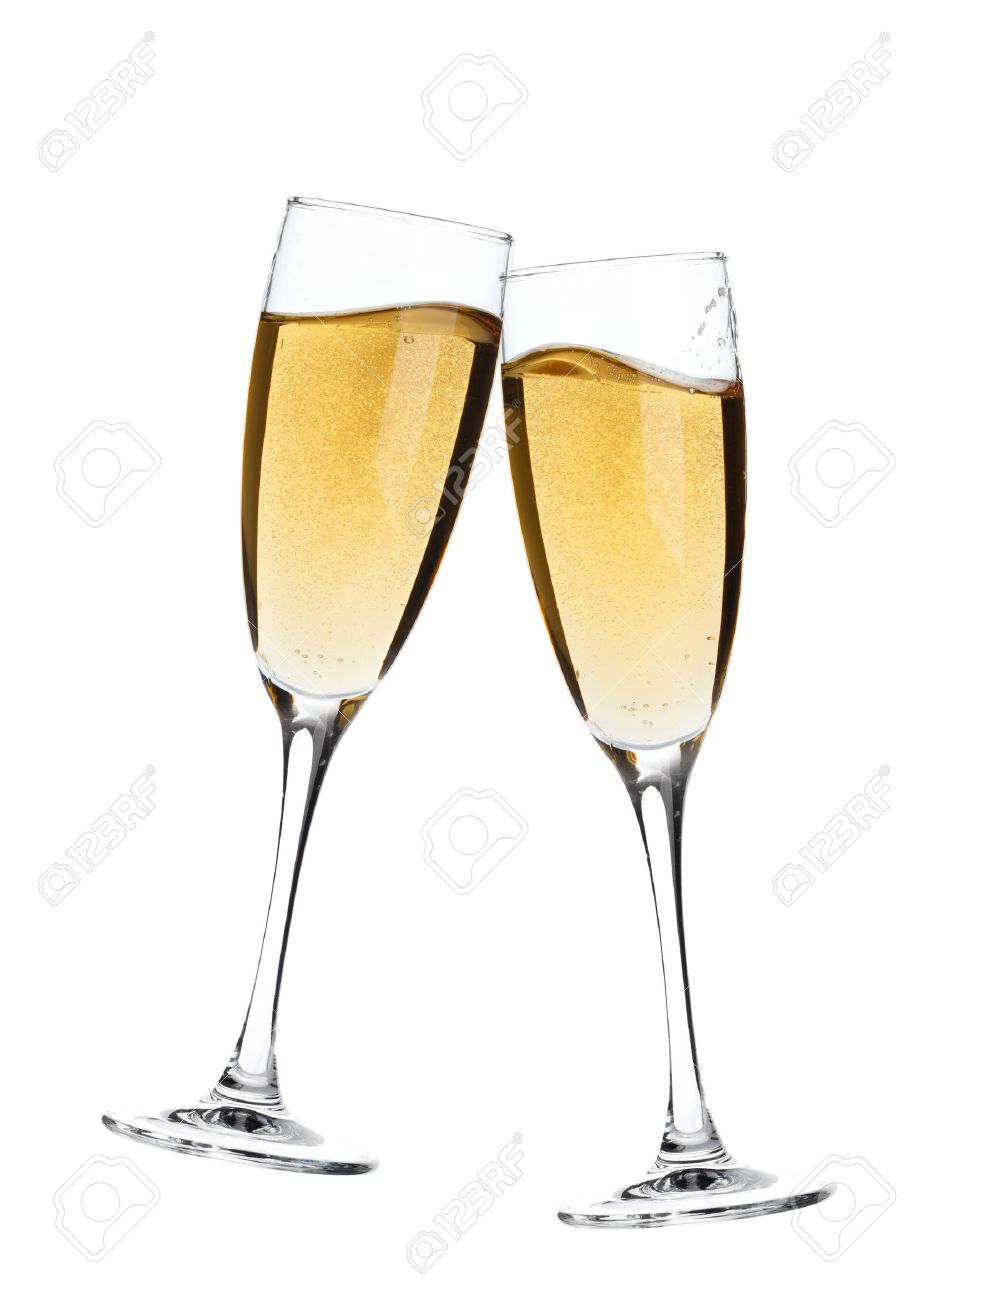 Cheers Two Champagne Glasses Isolated On White Background Stock